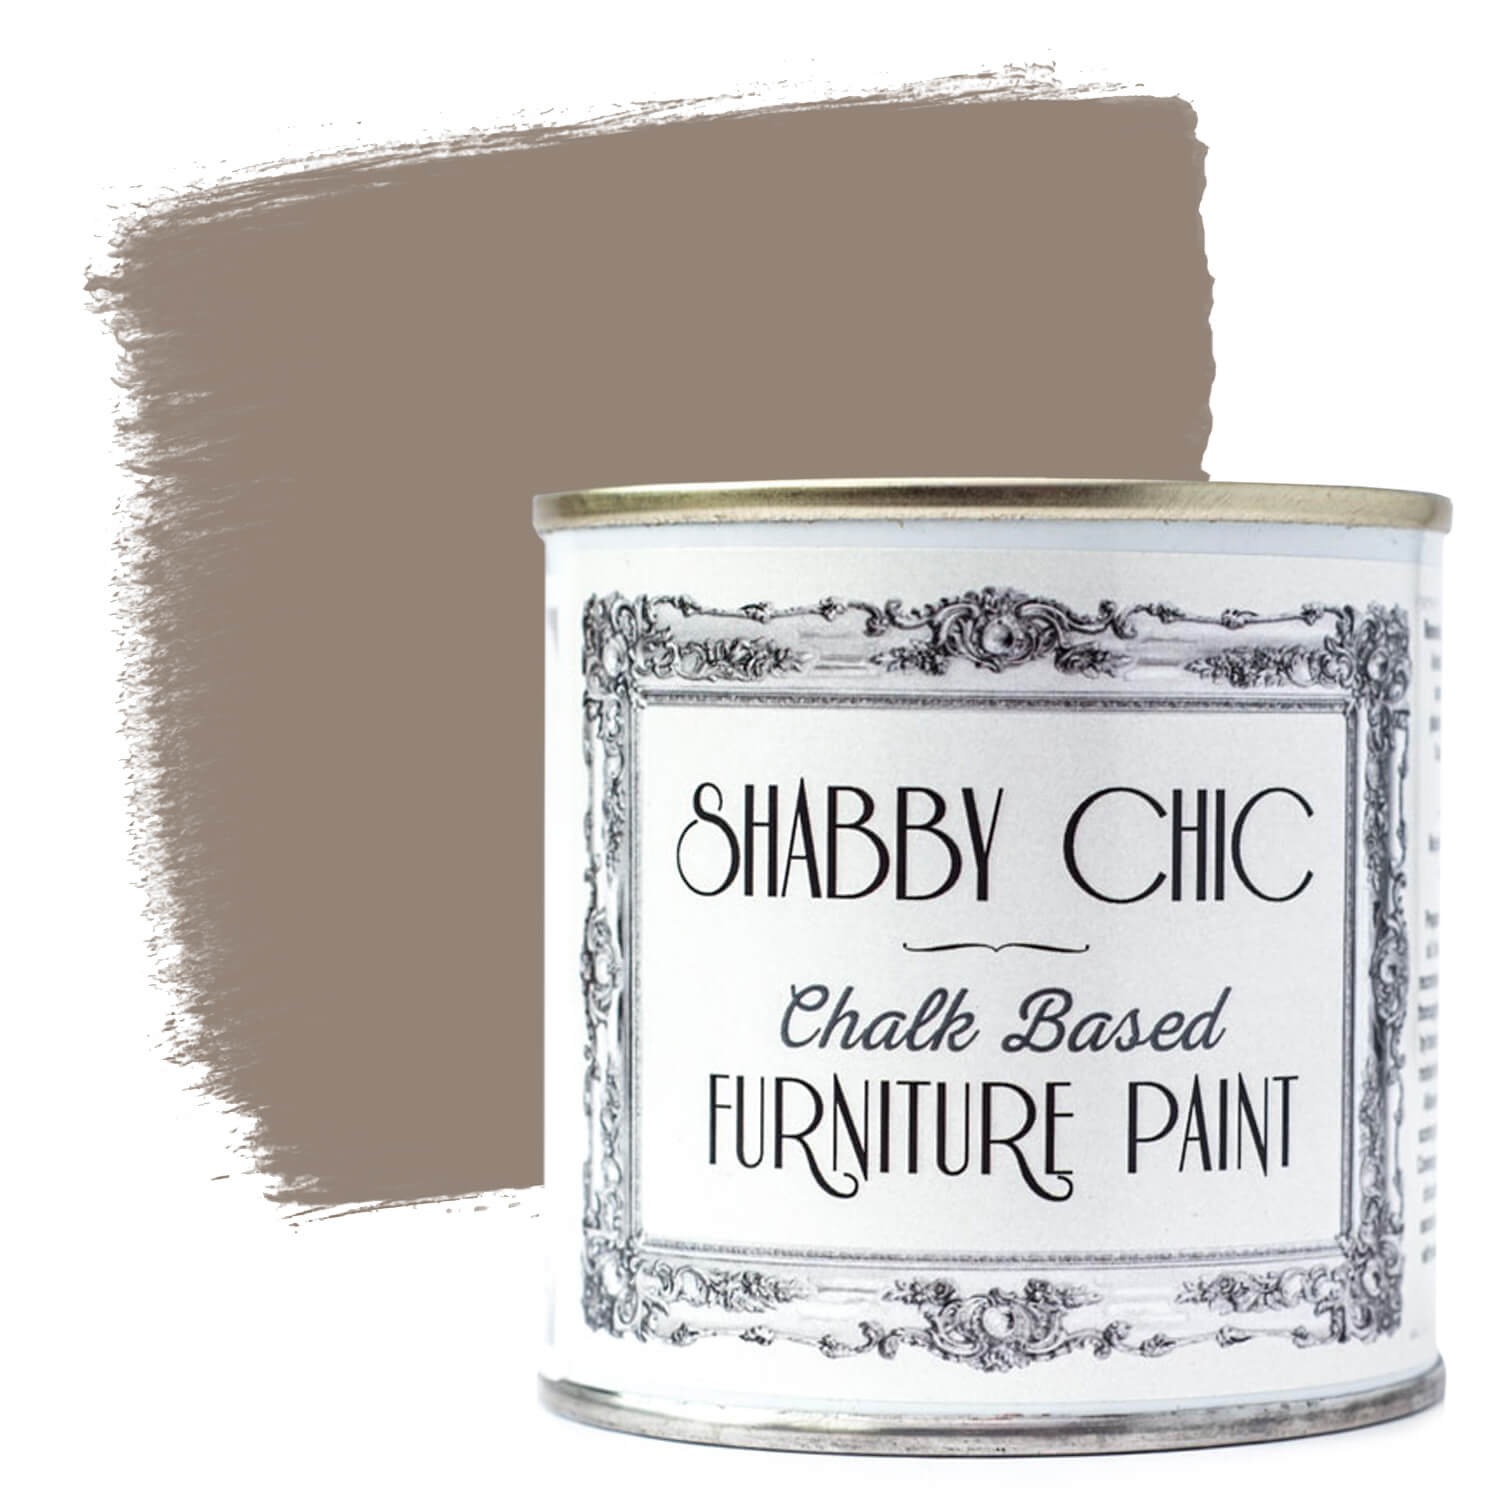 Shabby Chic Furniture Paint in Latte